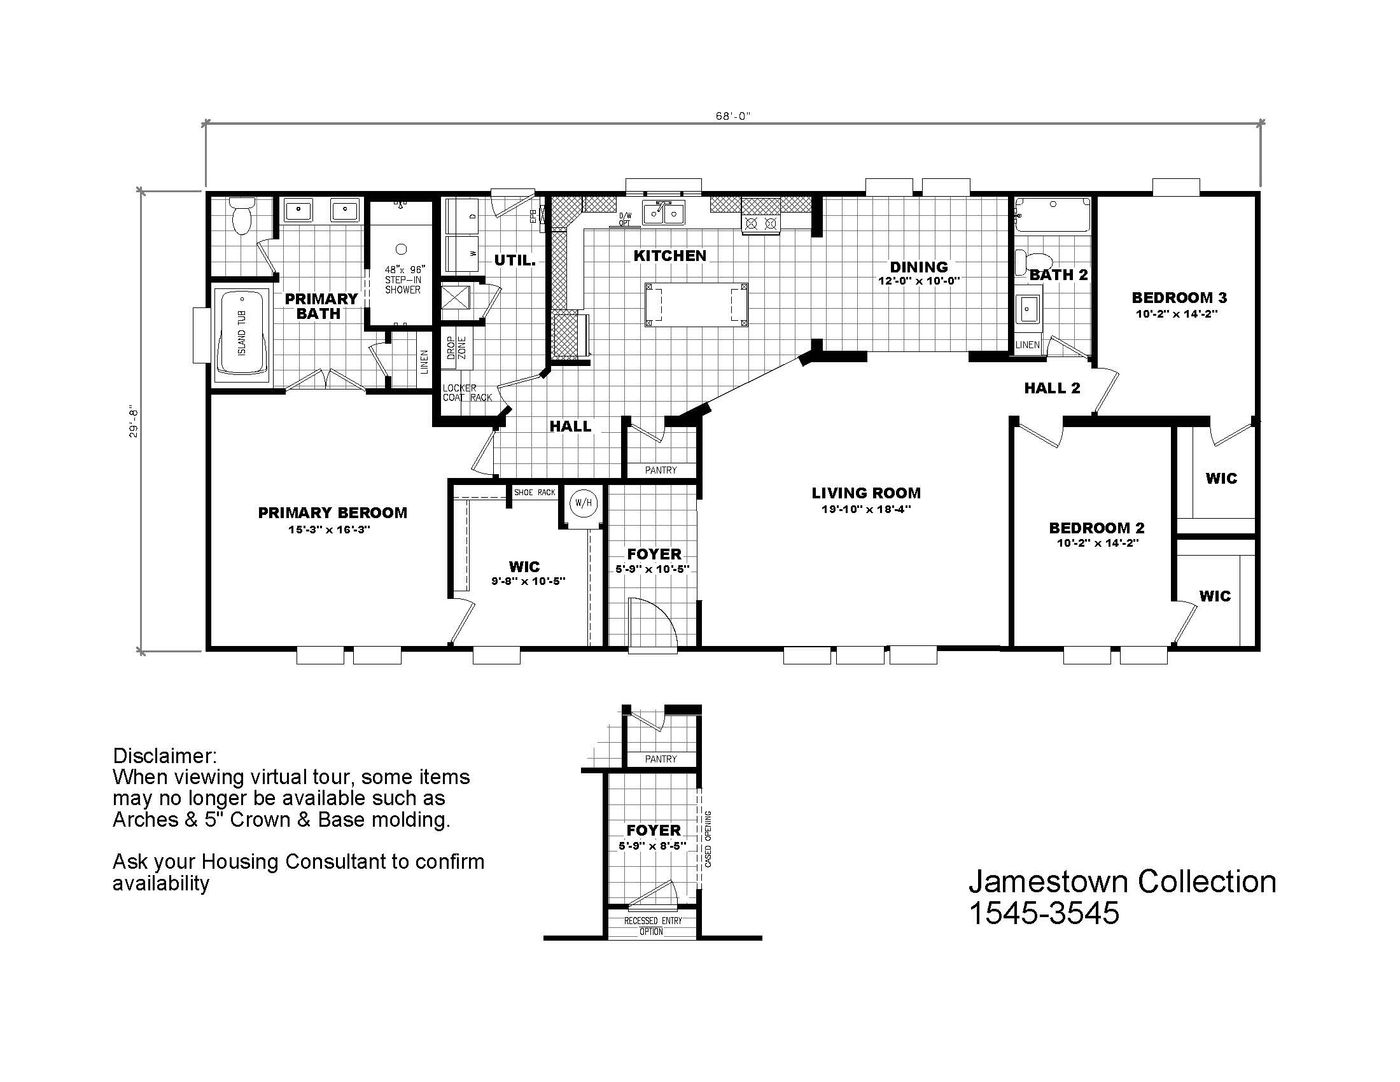 The 3545 JAMESTOWN Floor Plan. This Modular Home features 3 bedrooms and 2 baths.